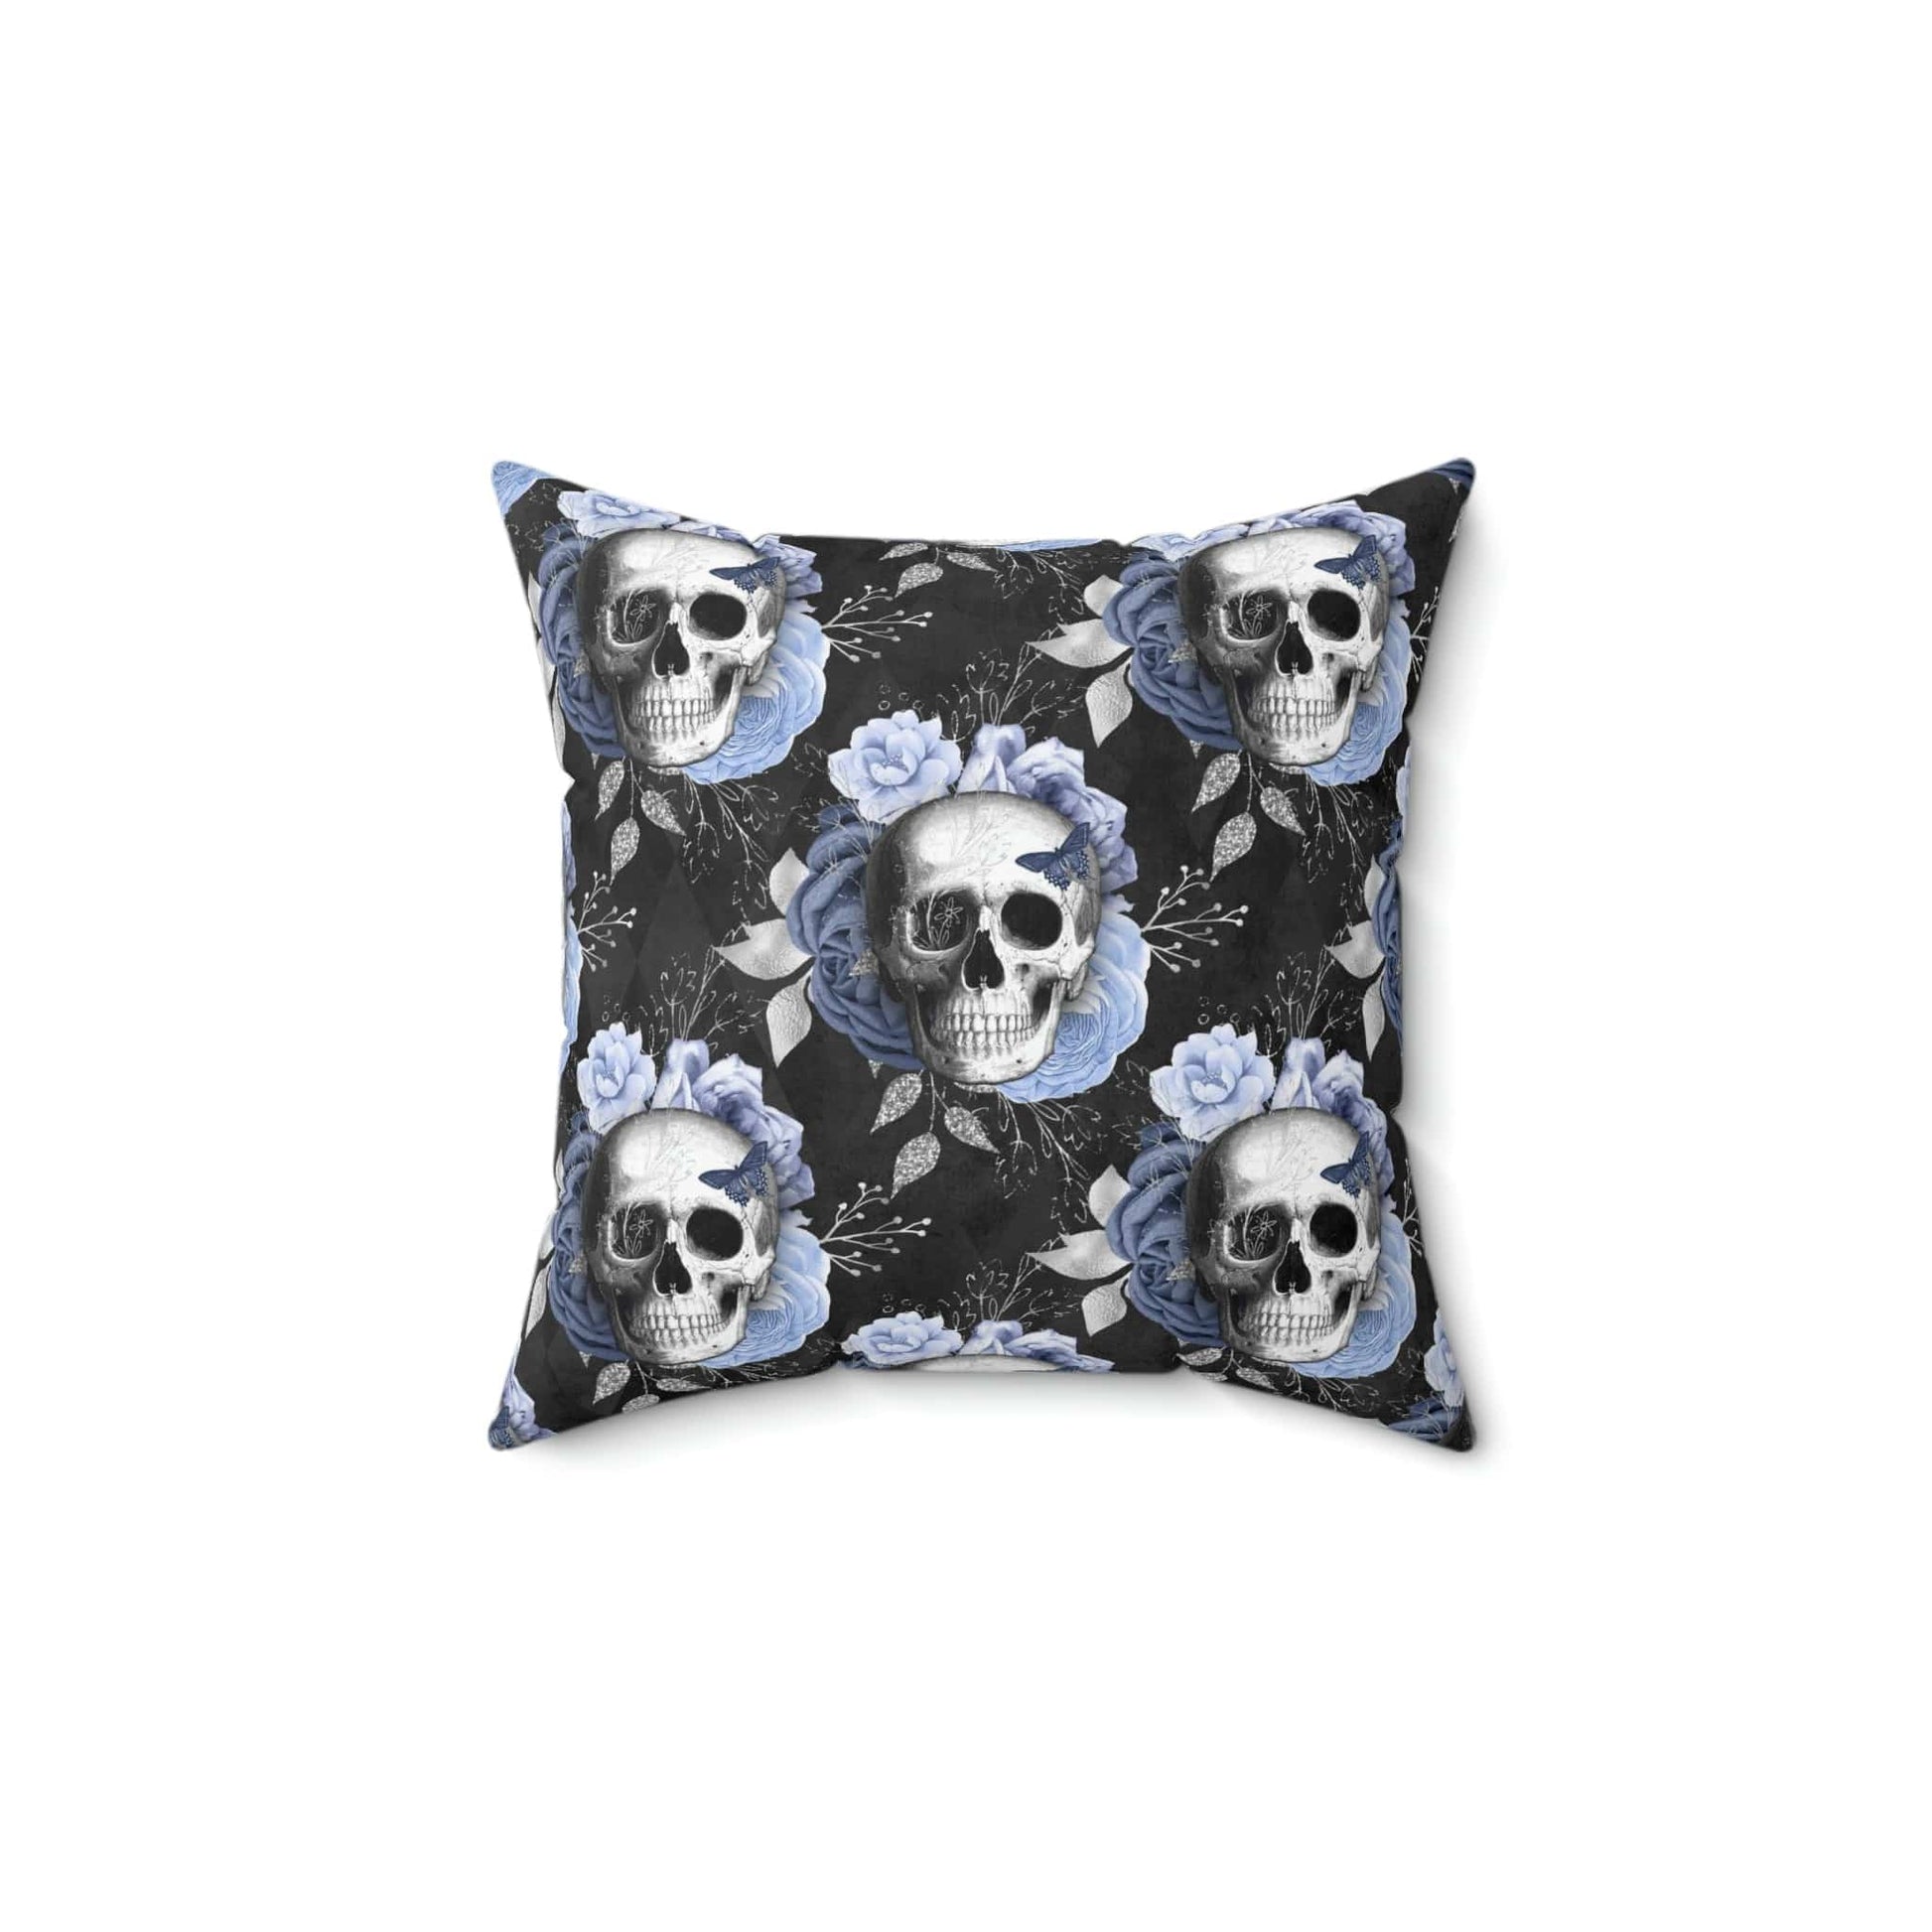 Kate McEnroe New York Floral Skull Square Pillow Cover Throw Pillow Covers 14" × 14" 3549442684